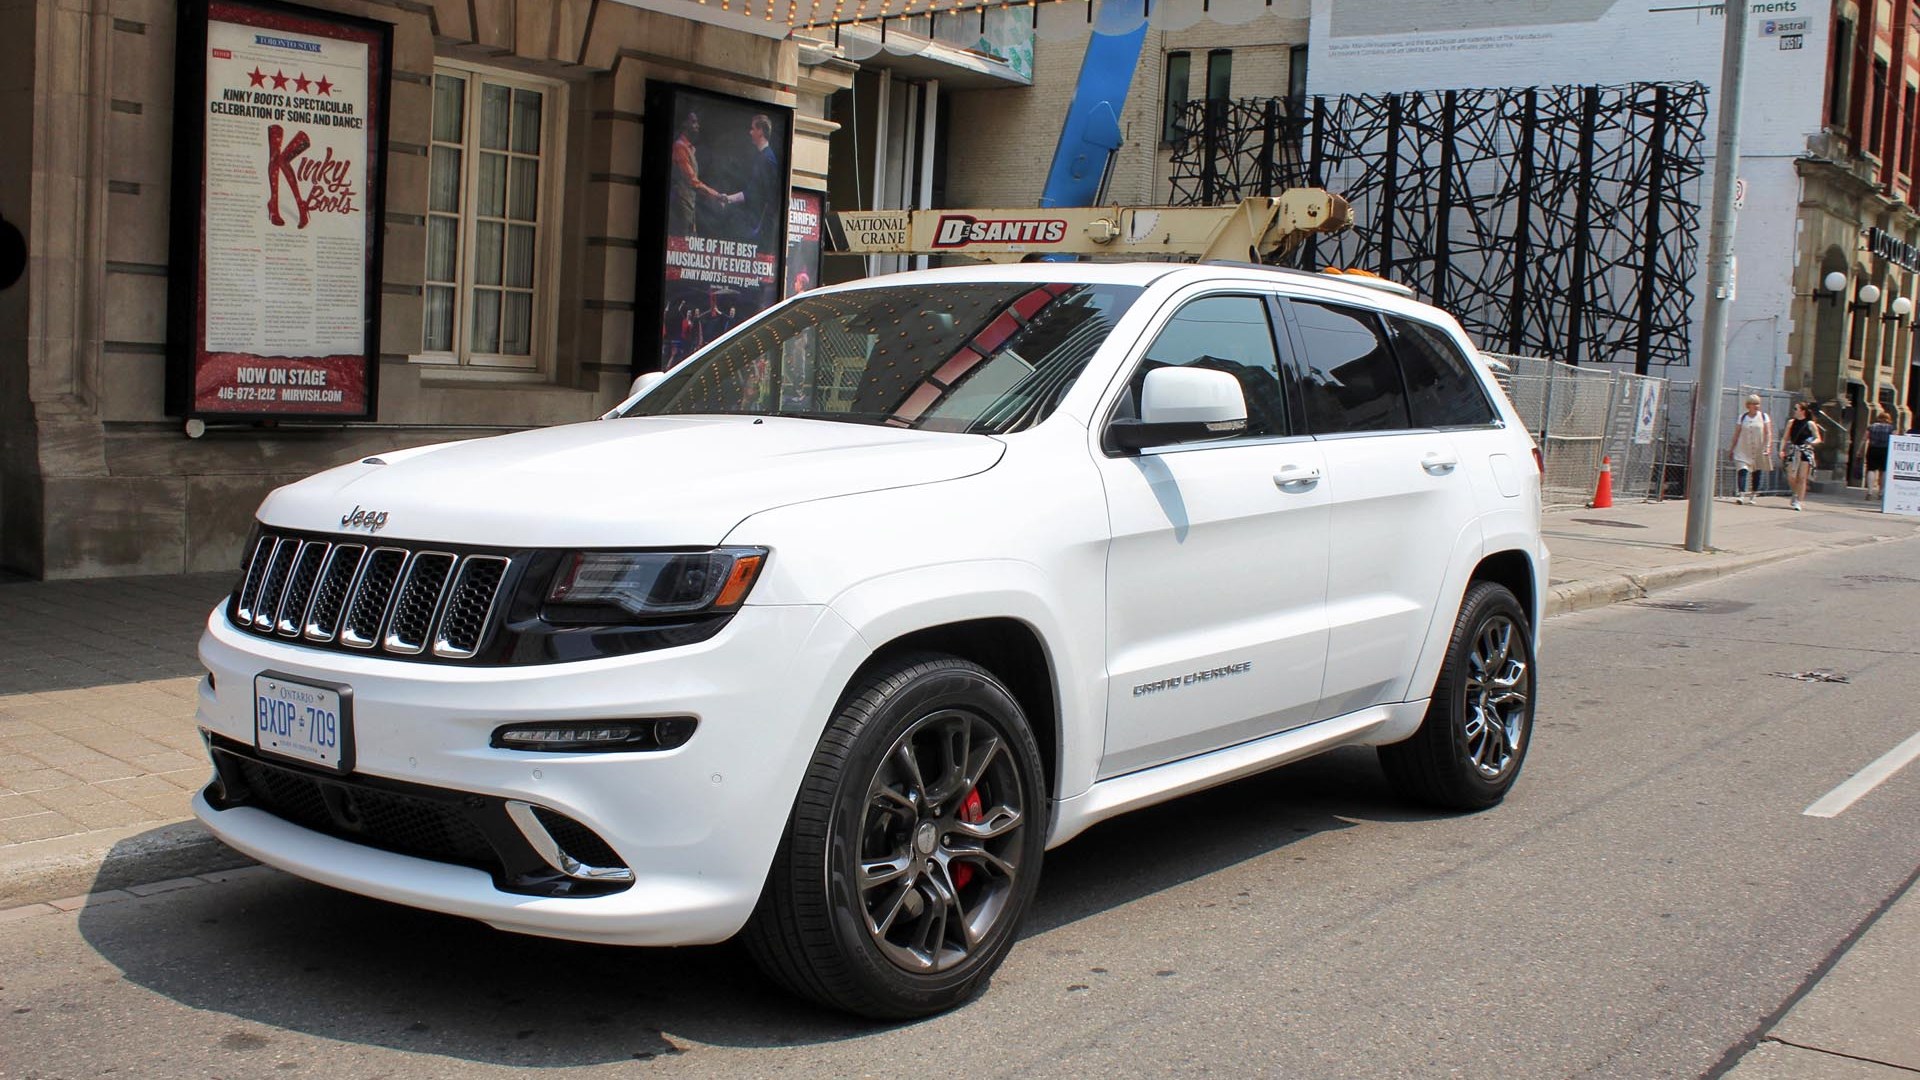 Jeep SRT’s Engine and Performance